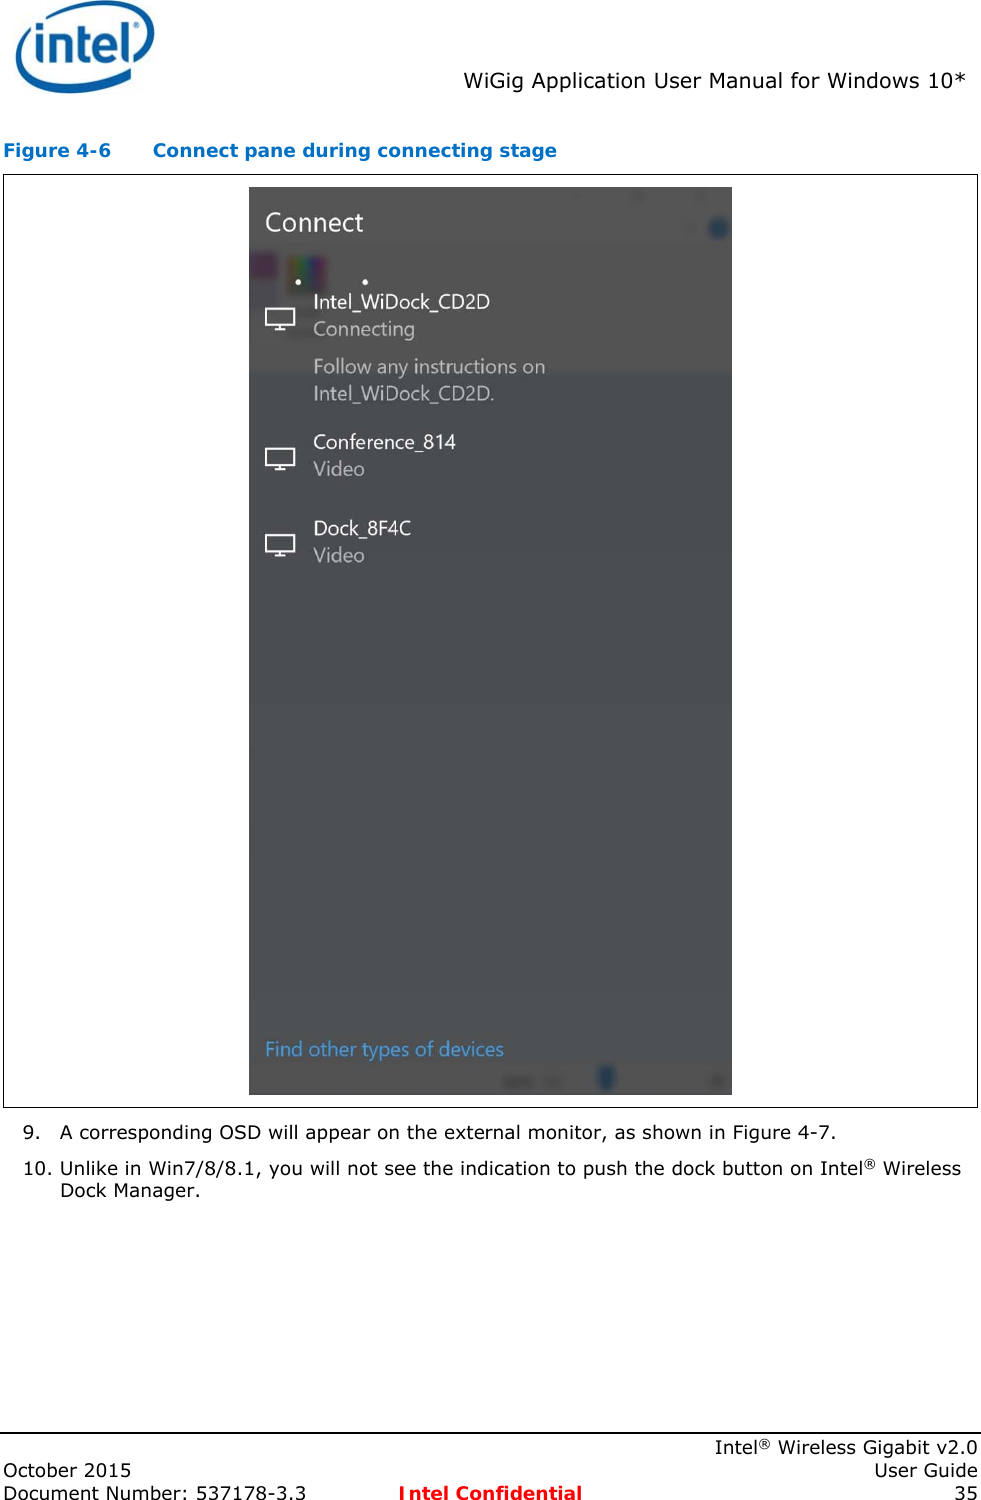  WiGig Application User Manual for Windows 10*    Intel® Wireless Gigabit v2.0 October 2015    User Guide Document Number: 537178-3.3  Intel Confidential 35 Figure 4-6  Connect pane during connecting stage  9. A corresponding OSD will appear on the external monitor, as shown in Figure 4-7. 10. Unlike in Win7/8/8.1, you will not see the indication to push the dock button on Intel® Wireless Dock Manager. 